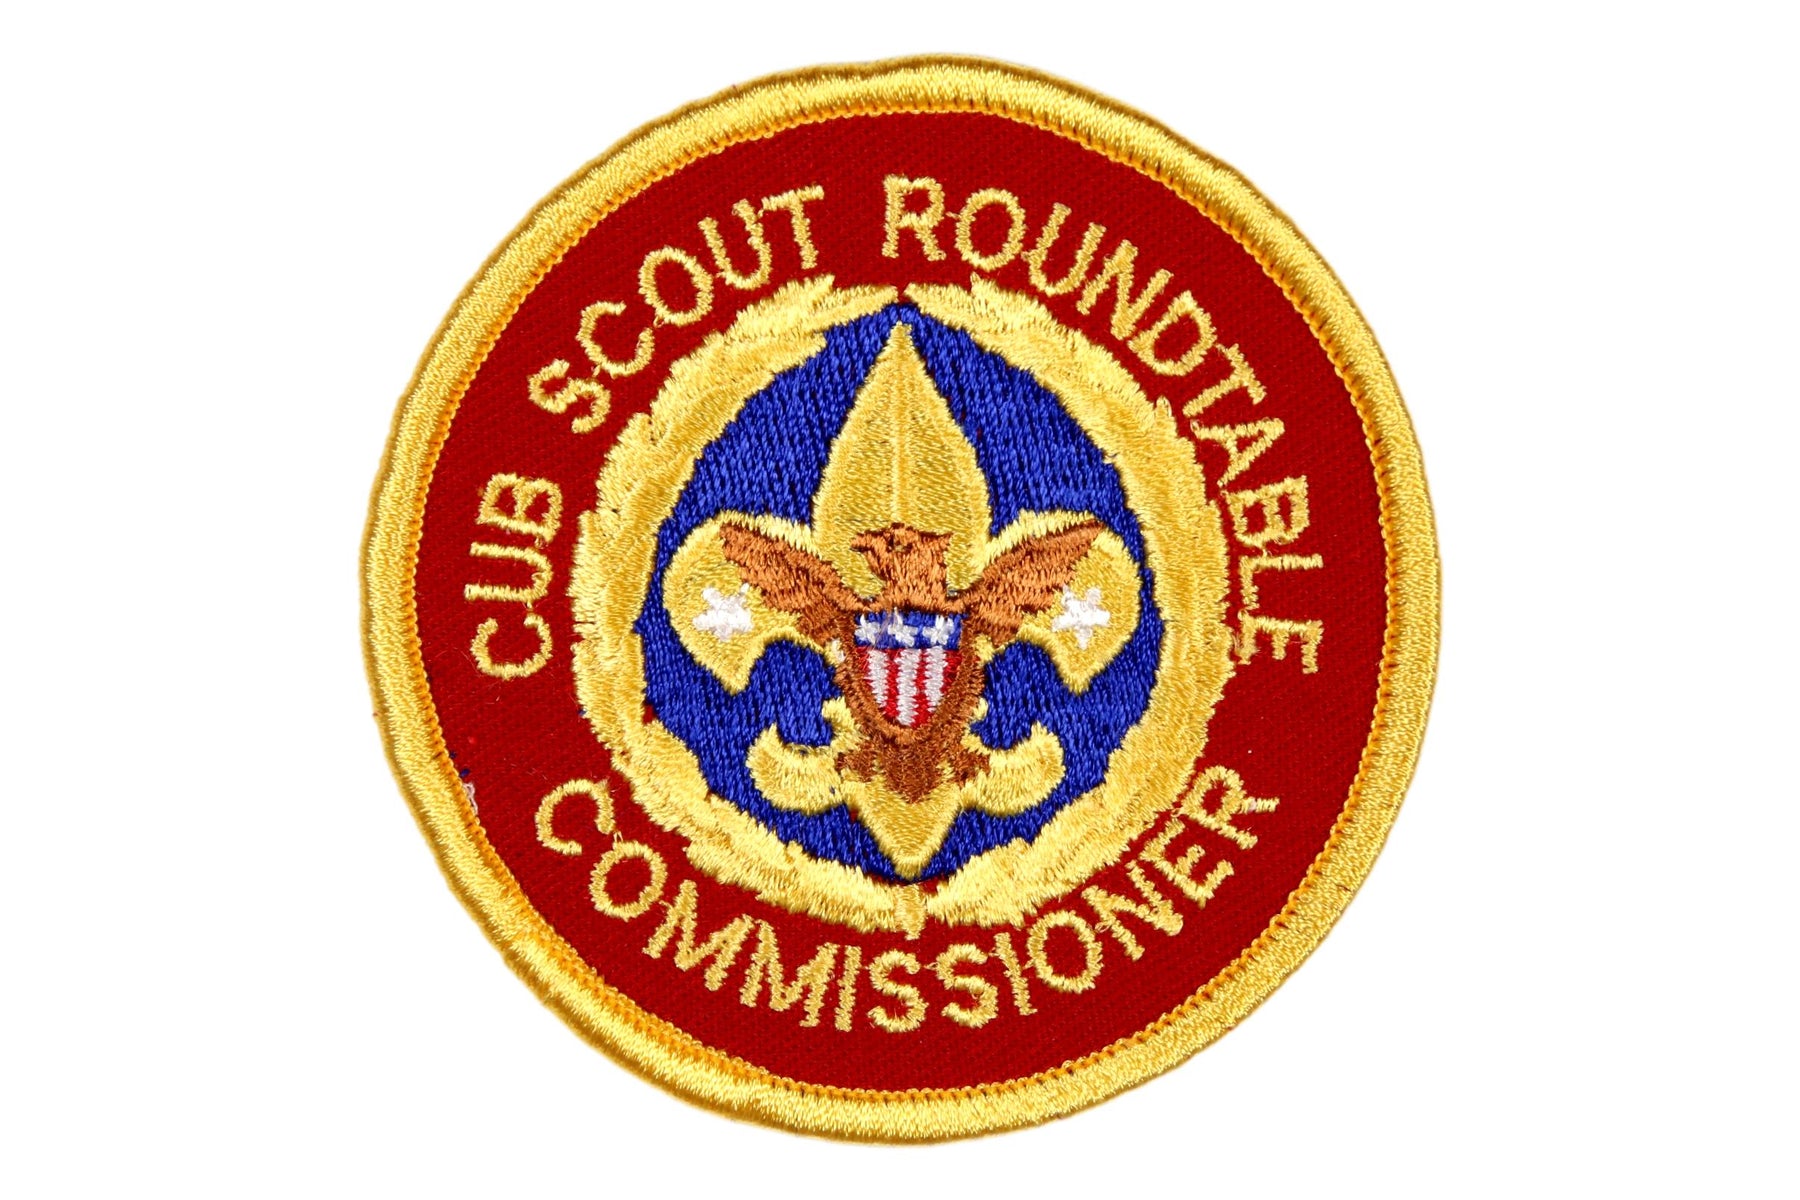 Cub Scout Roundtable Commissioner Patch 1980s